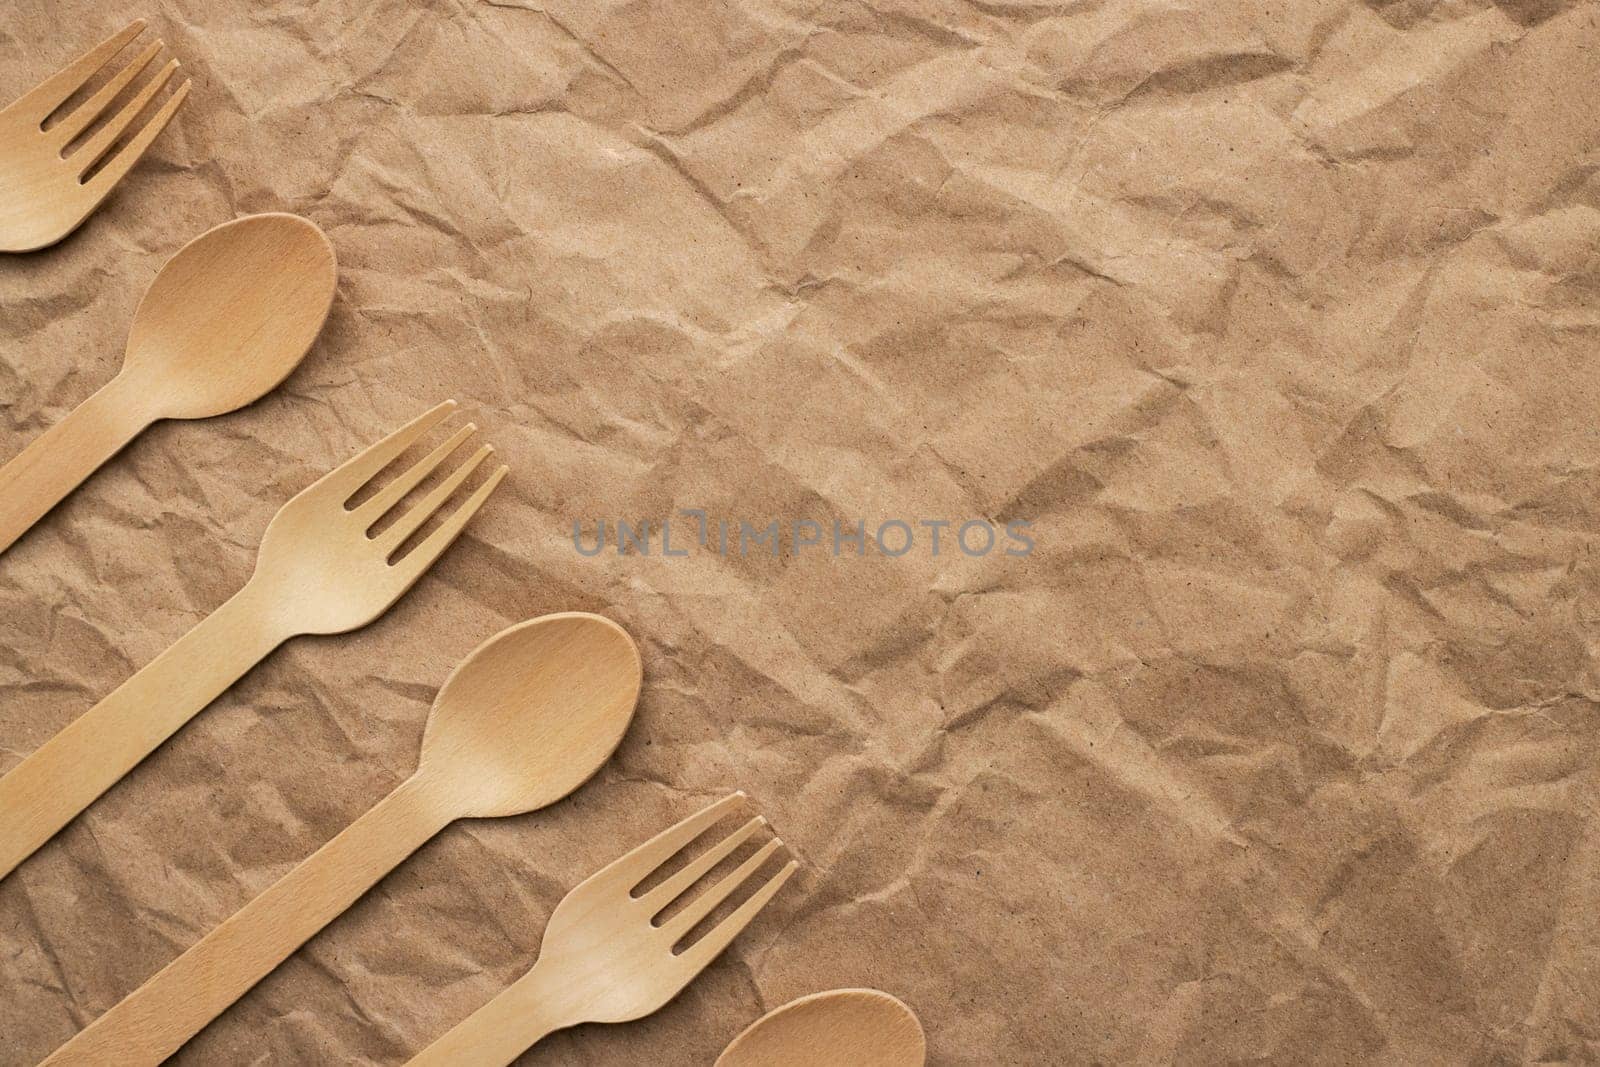 Set of wooden forks and spoons on crumpled paper background. Biodegradable eco-friendly dishes. Top view